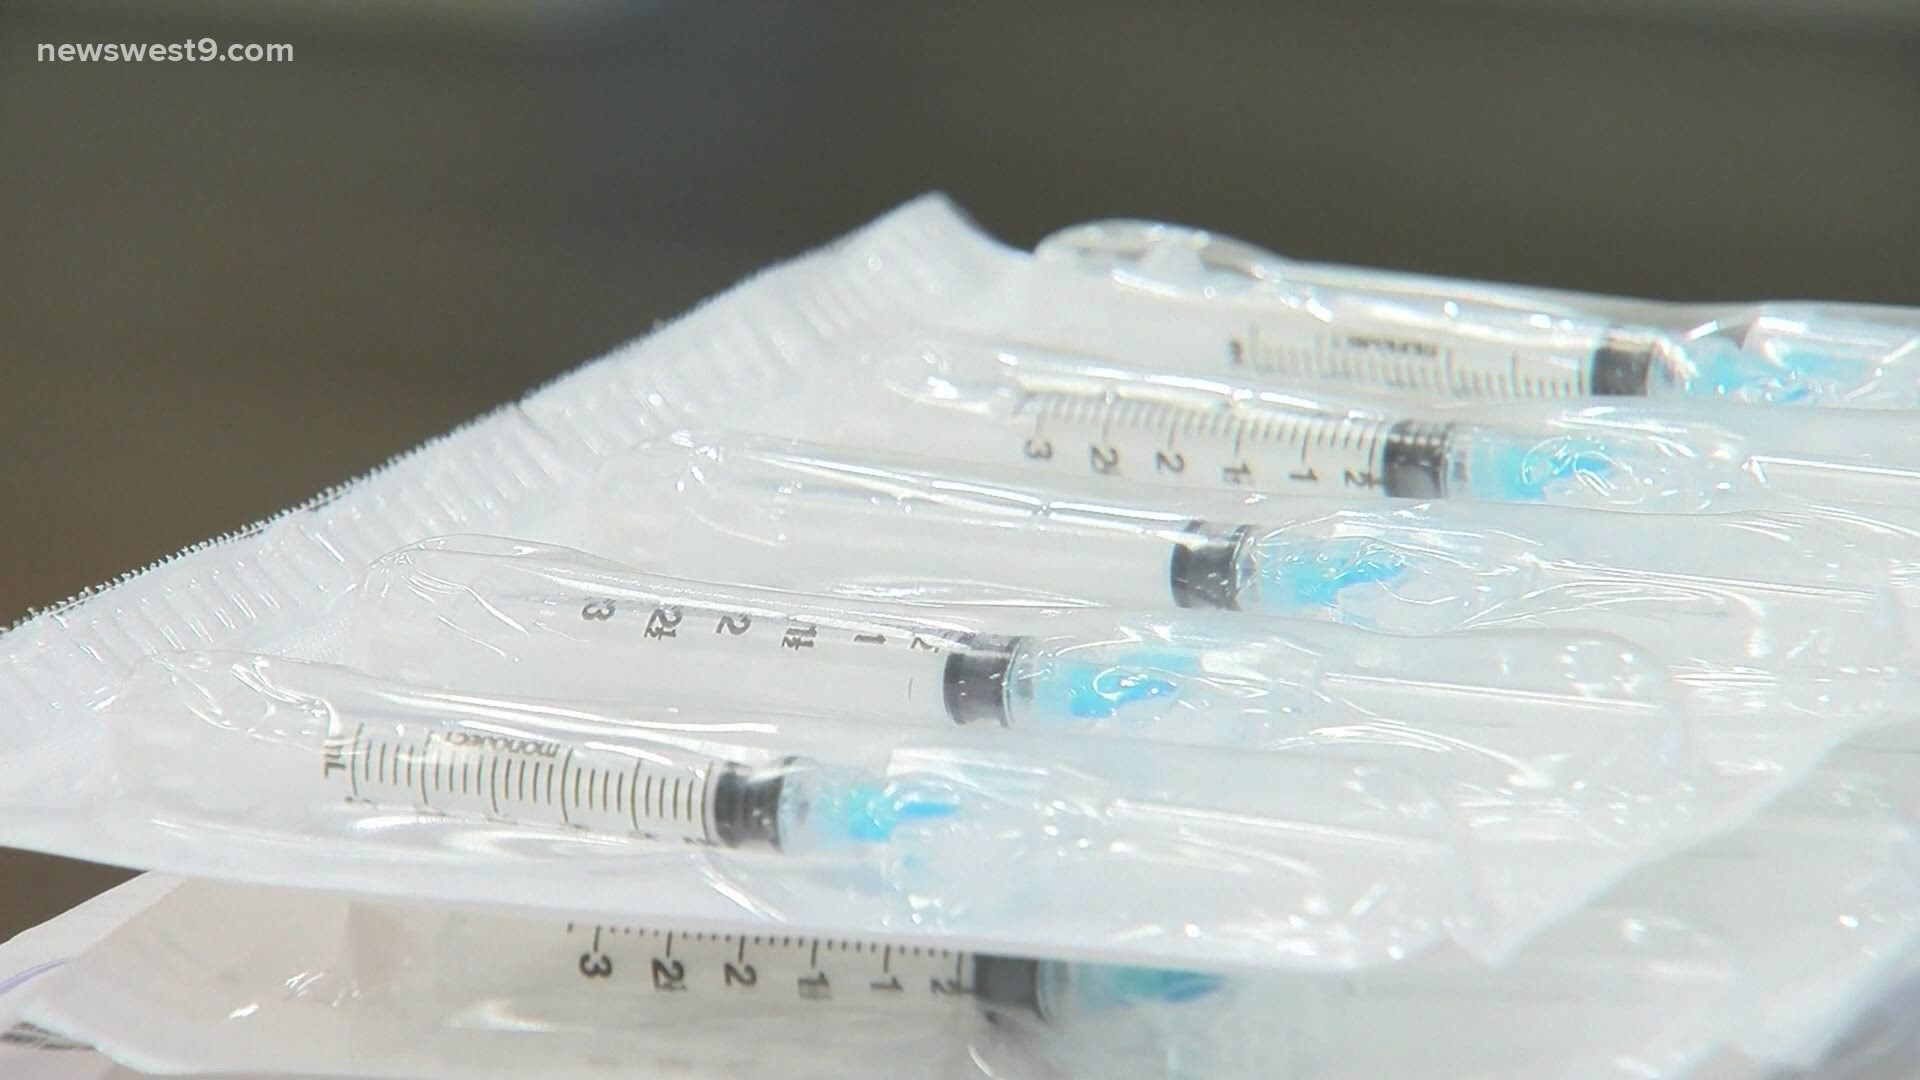 When the virus was peaking in Midland and Odessa,  the health departments were seeing around 80 positive cases a day. Lately, it is down to about 8-15 cases a day.